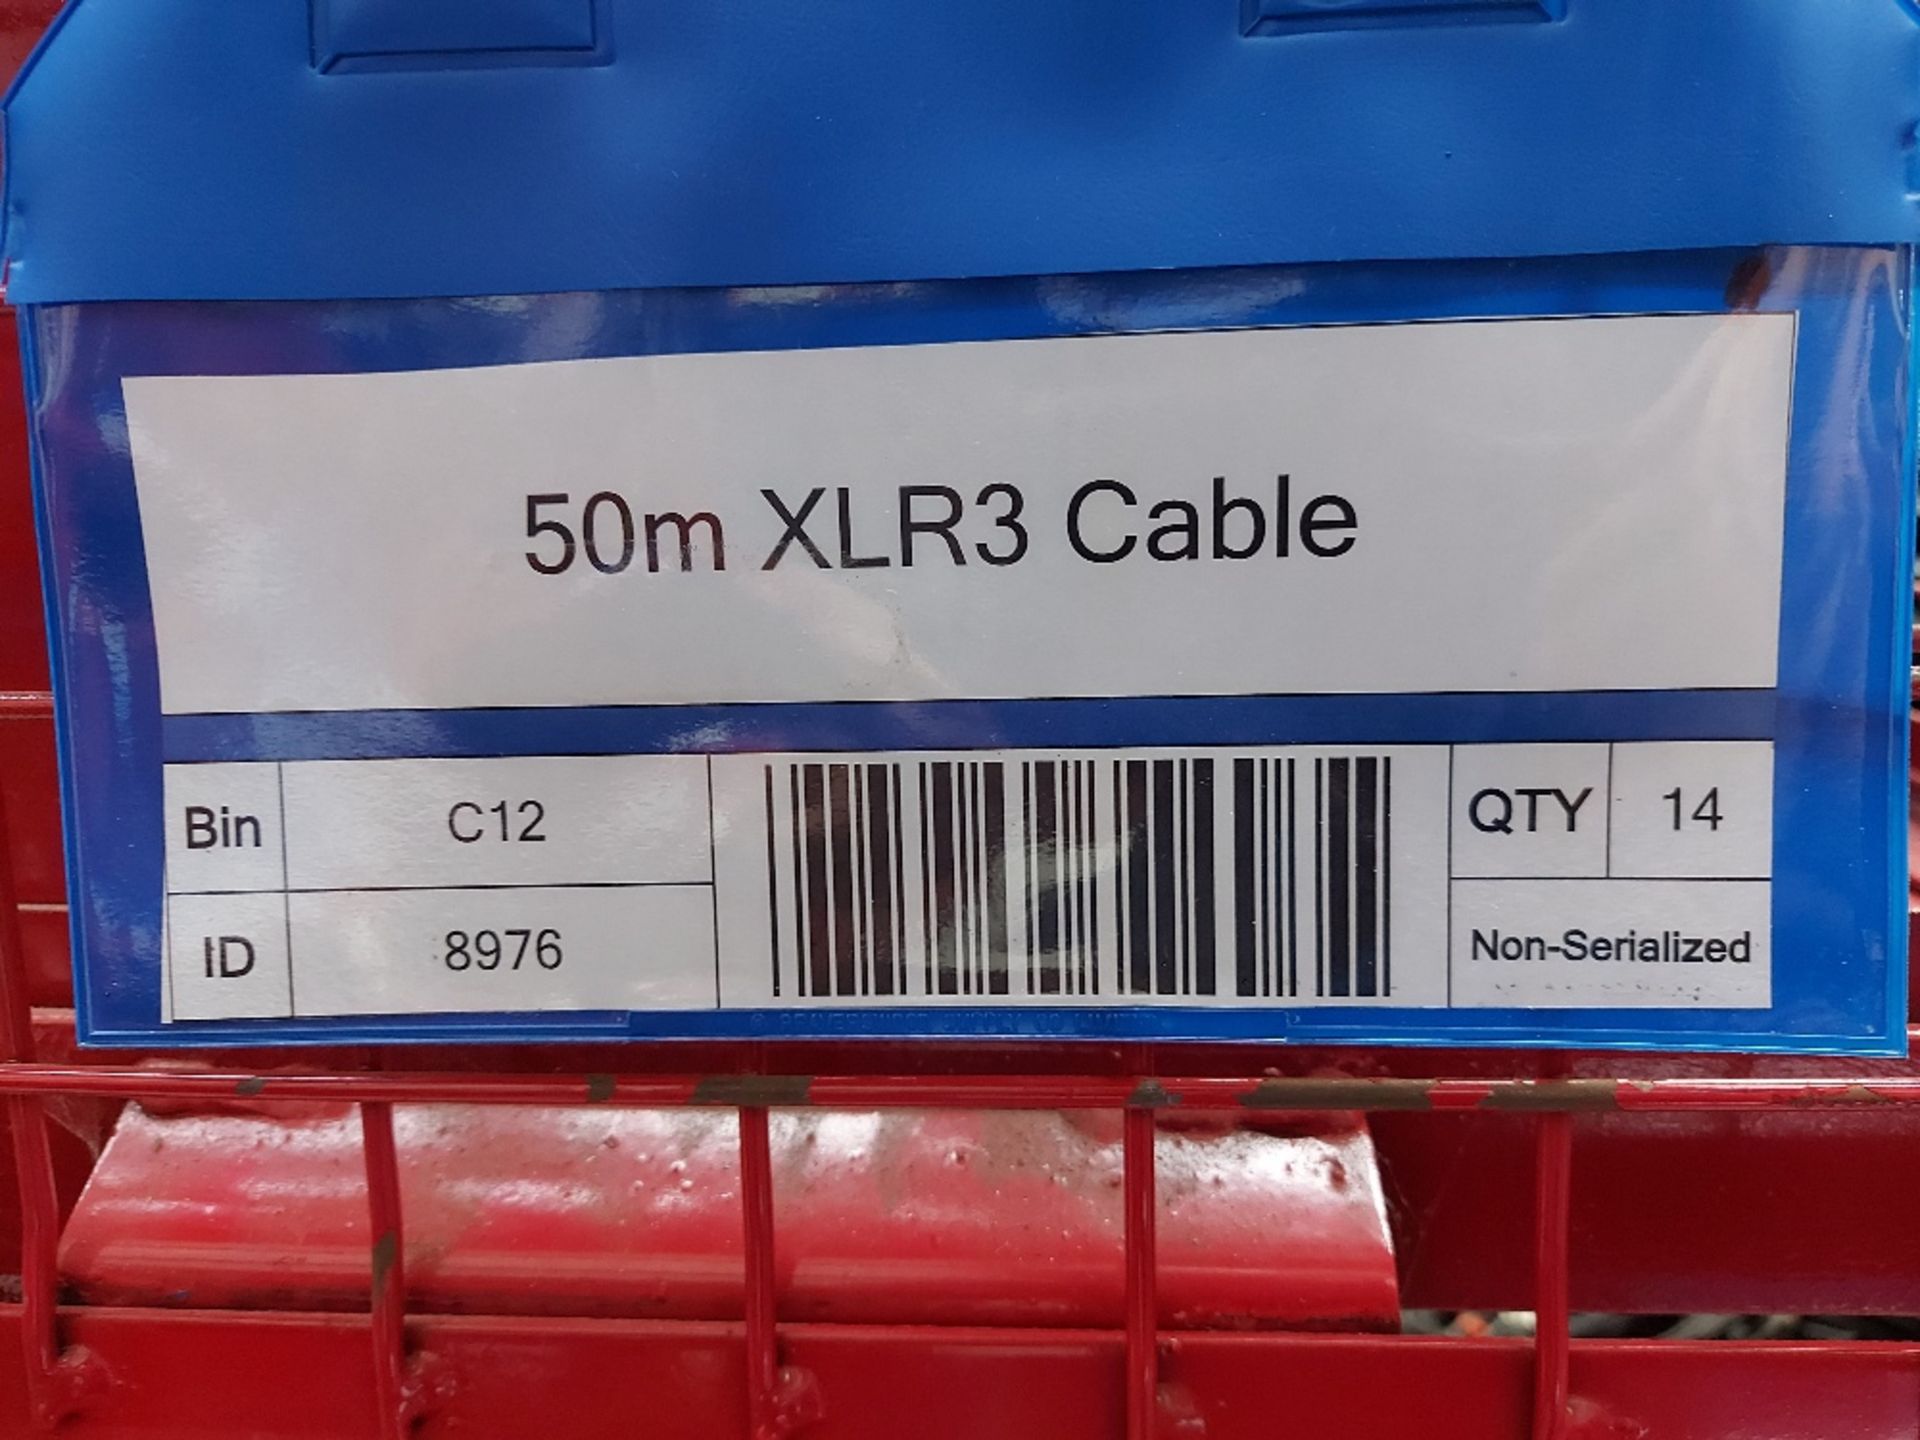 Large Quantity of 50m XLR3 Cable & Large Quantity 30M XLR3 Cable with Steel Fabricated Stillage - Image 4 of 5